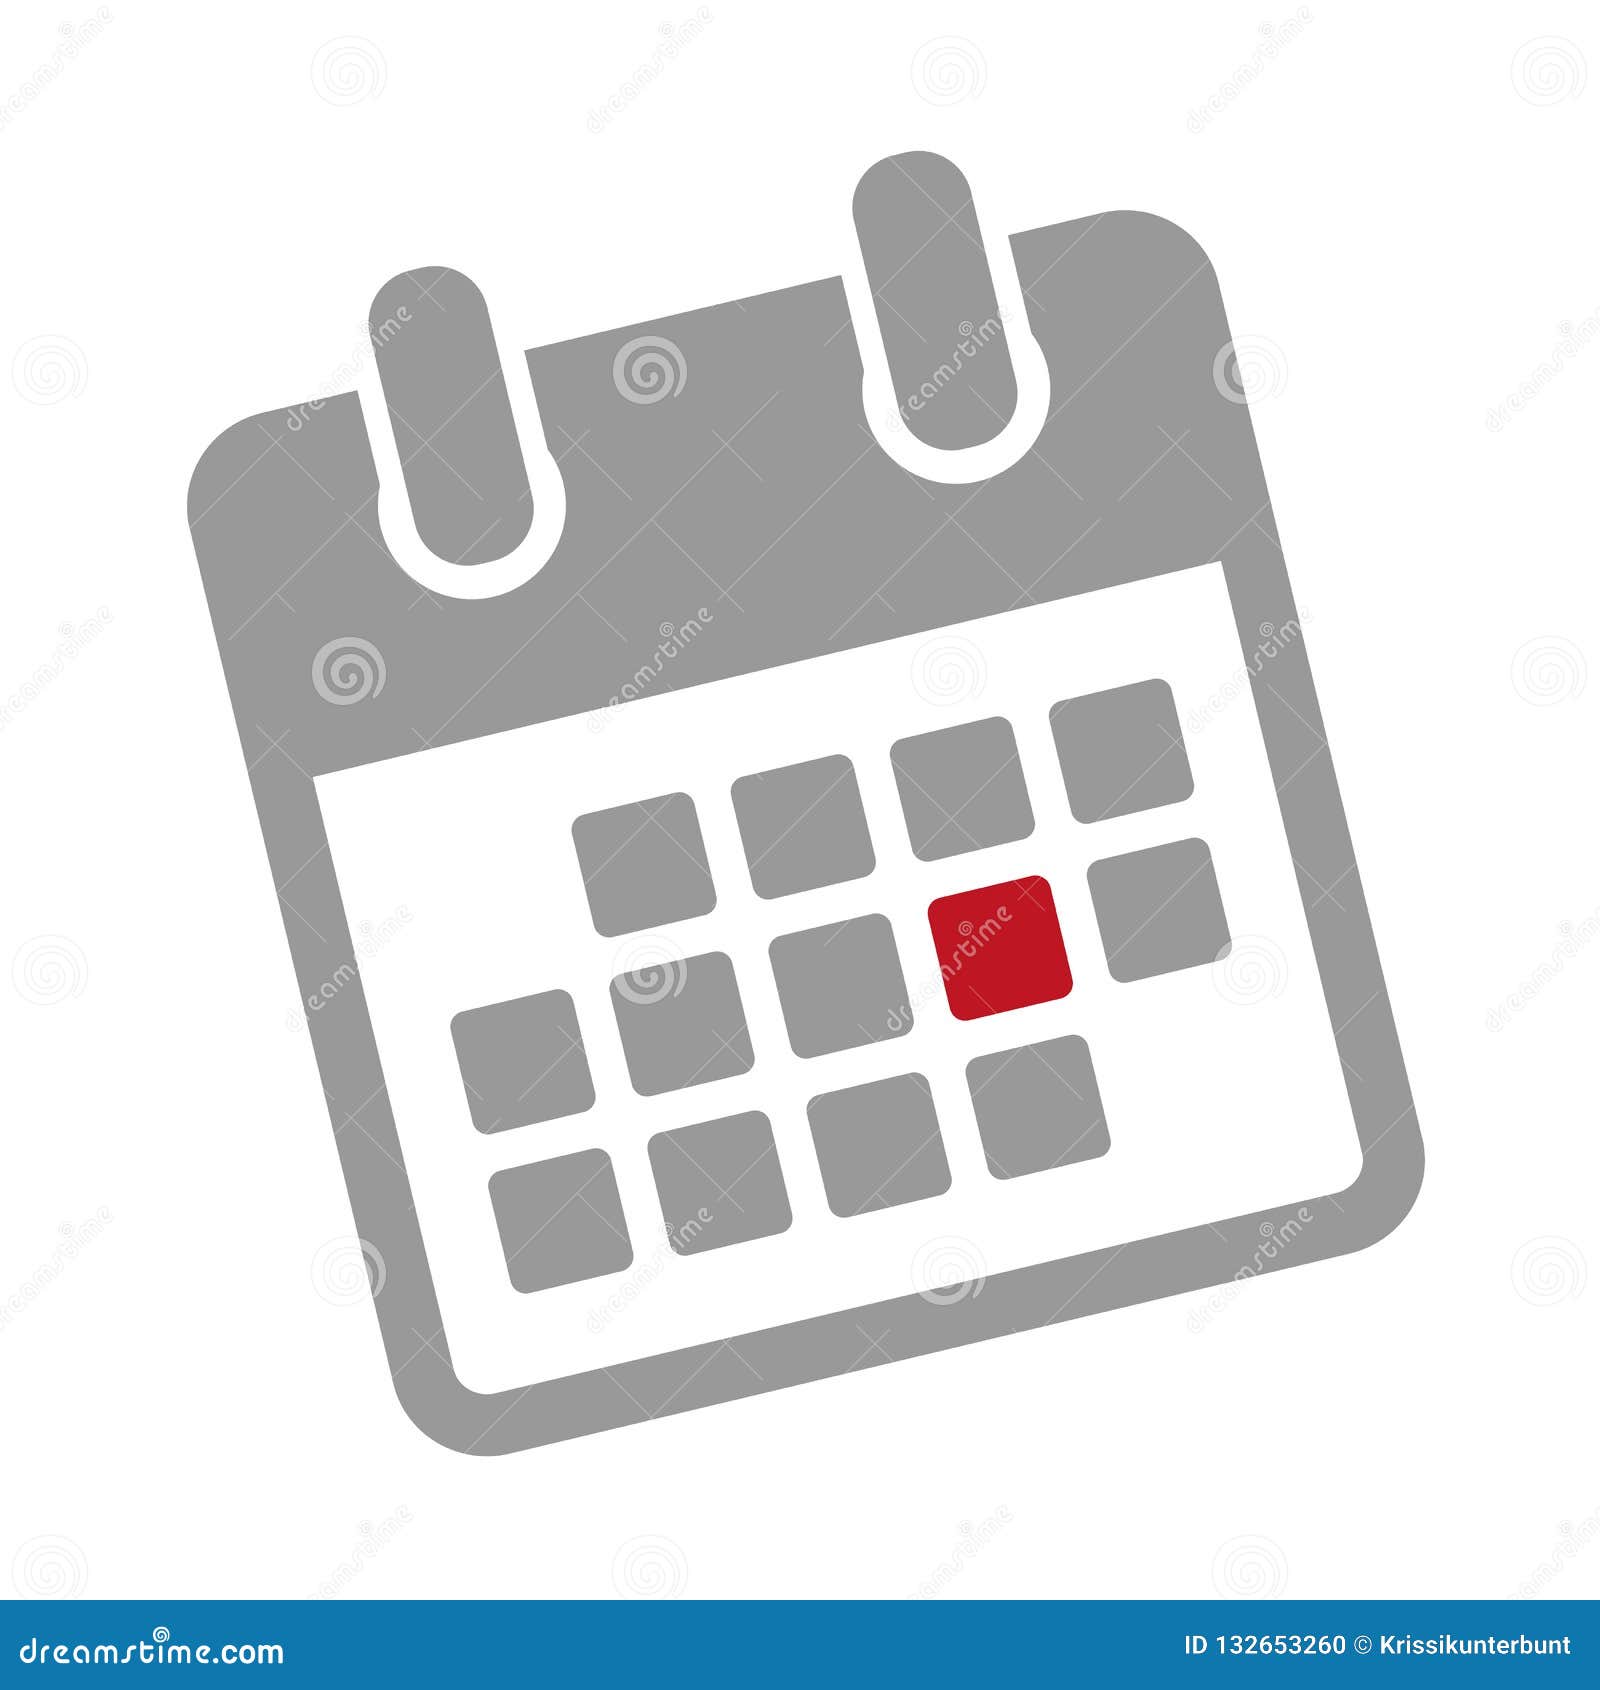 Appointment in a Grey Calendar Icon Pictogram Stock Vector